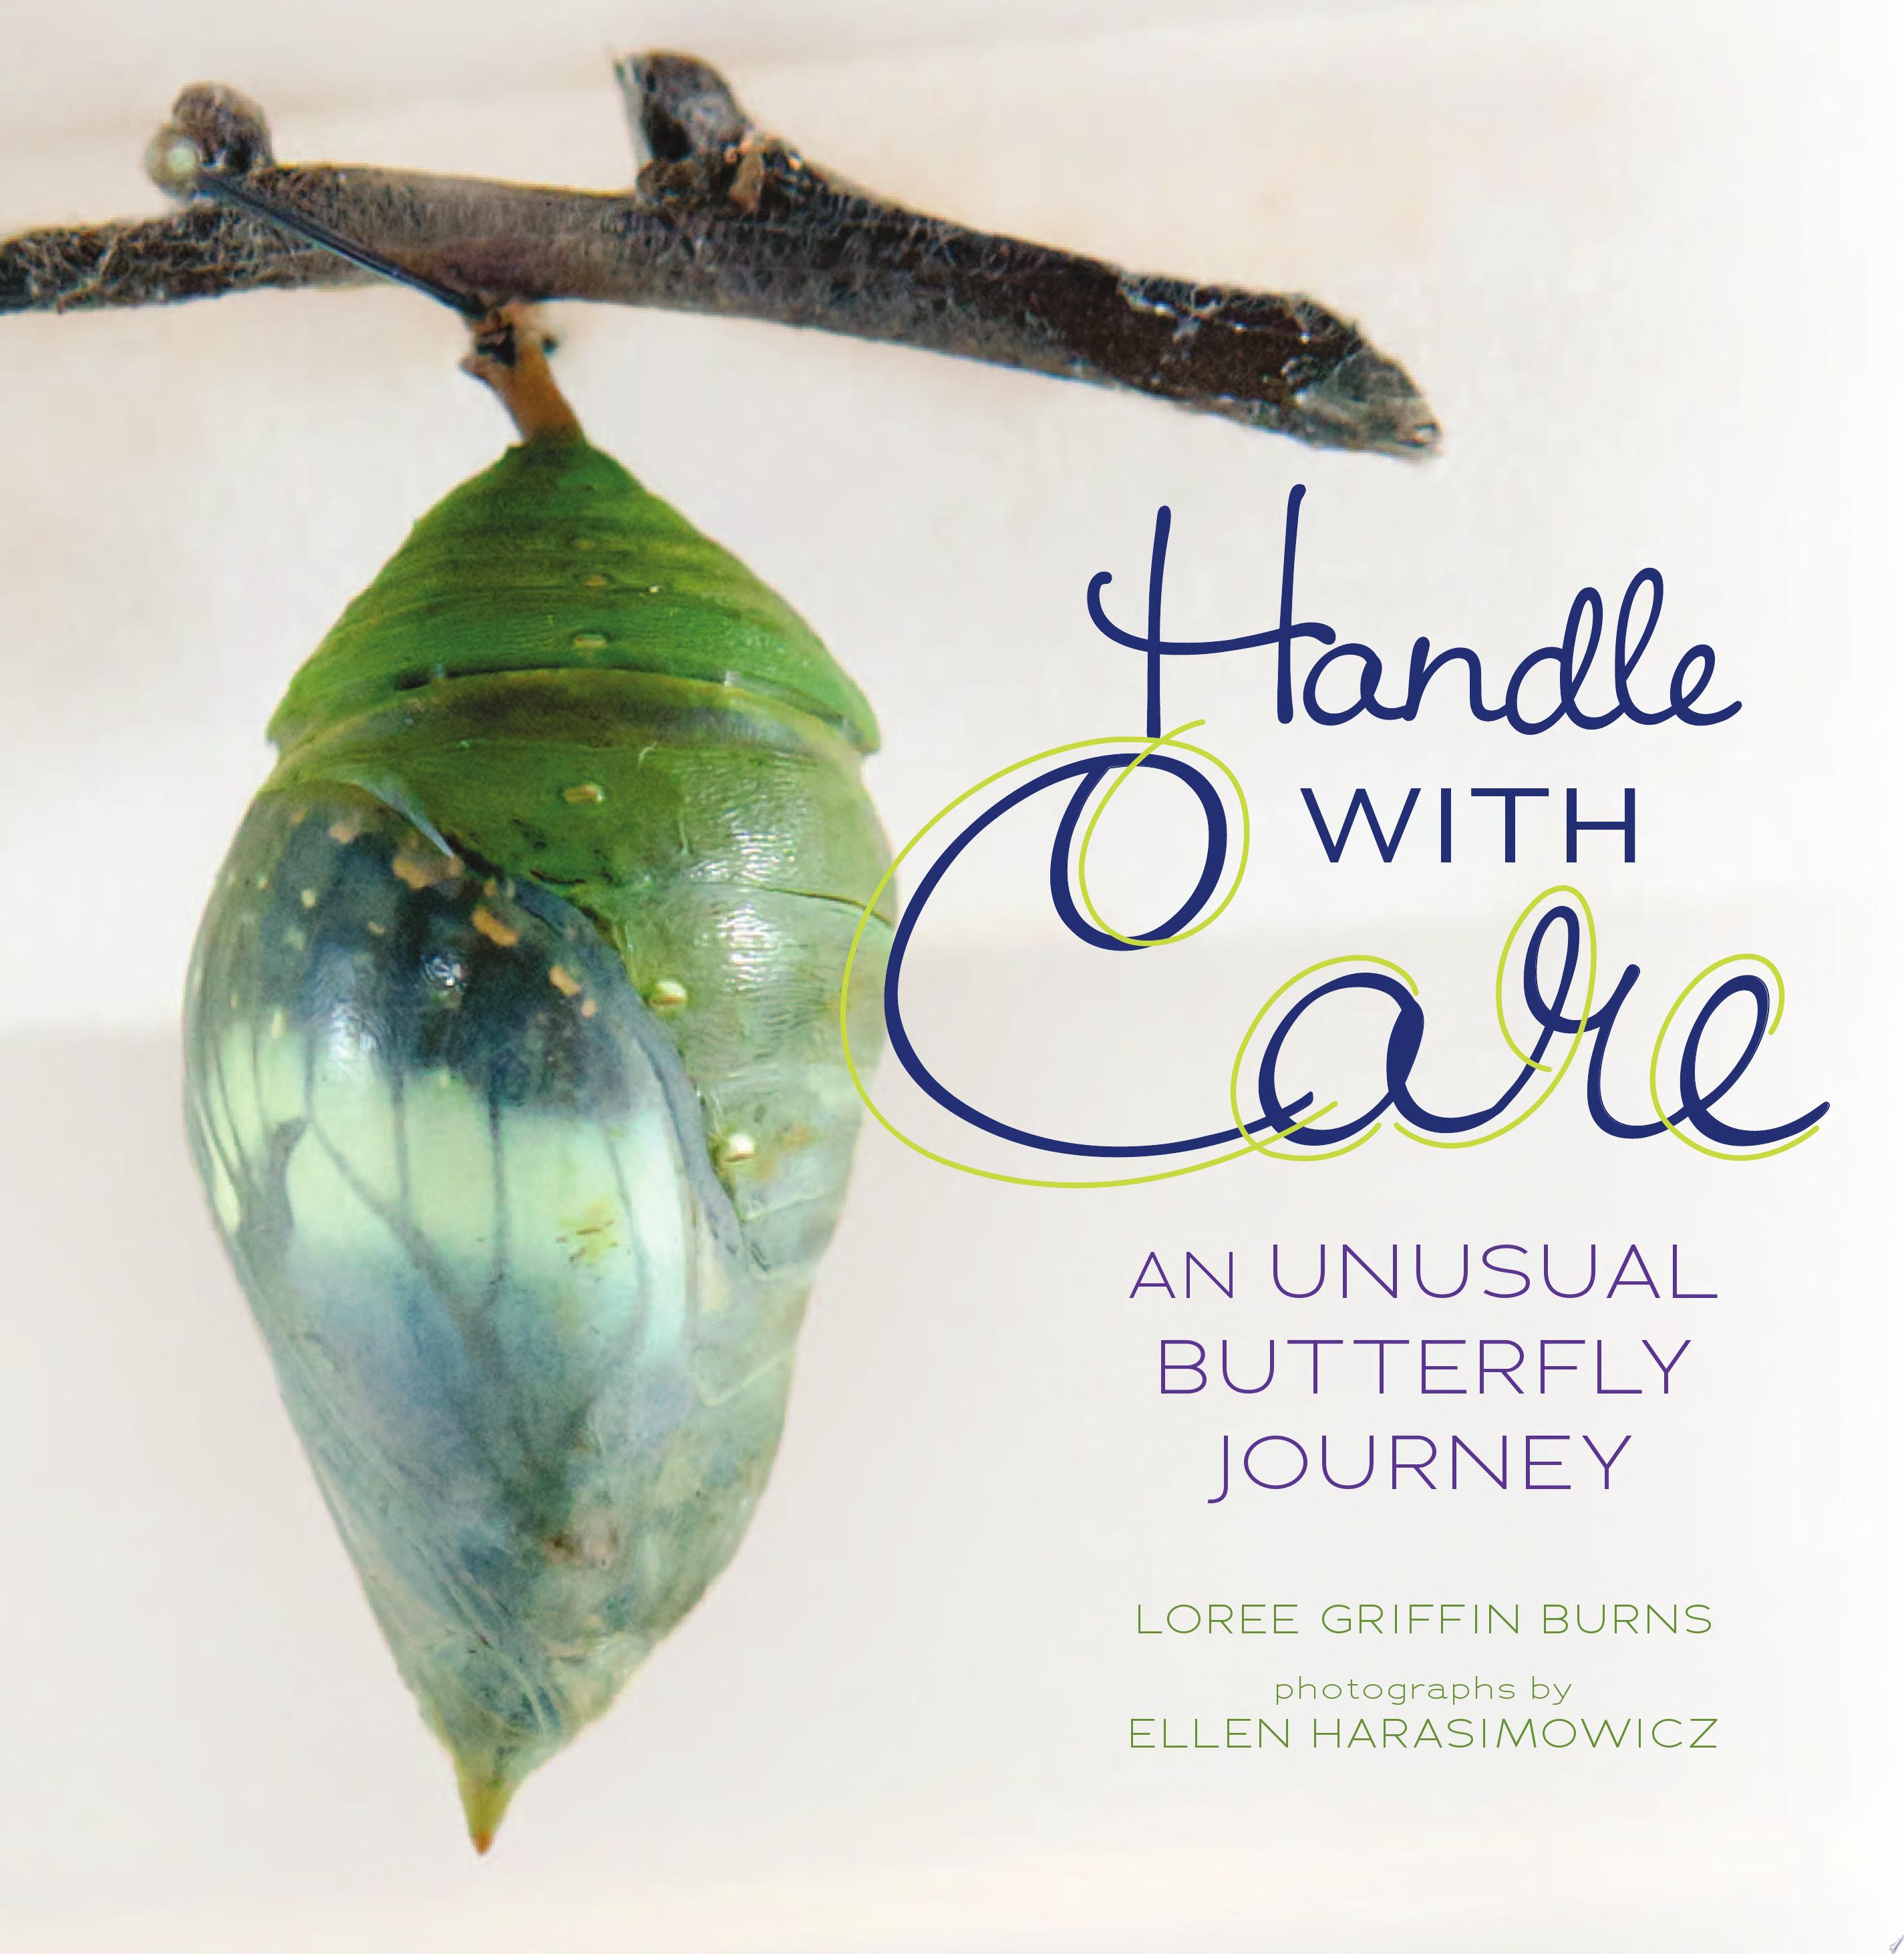 Image for "Handle with Care"